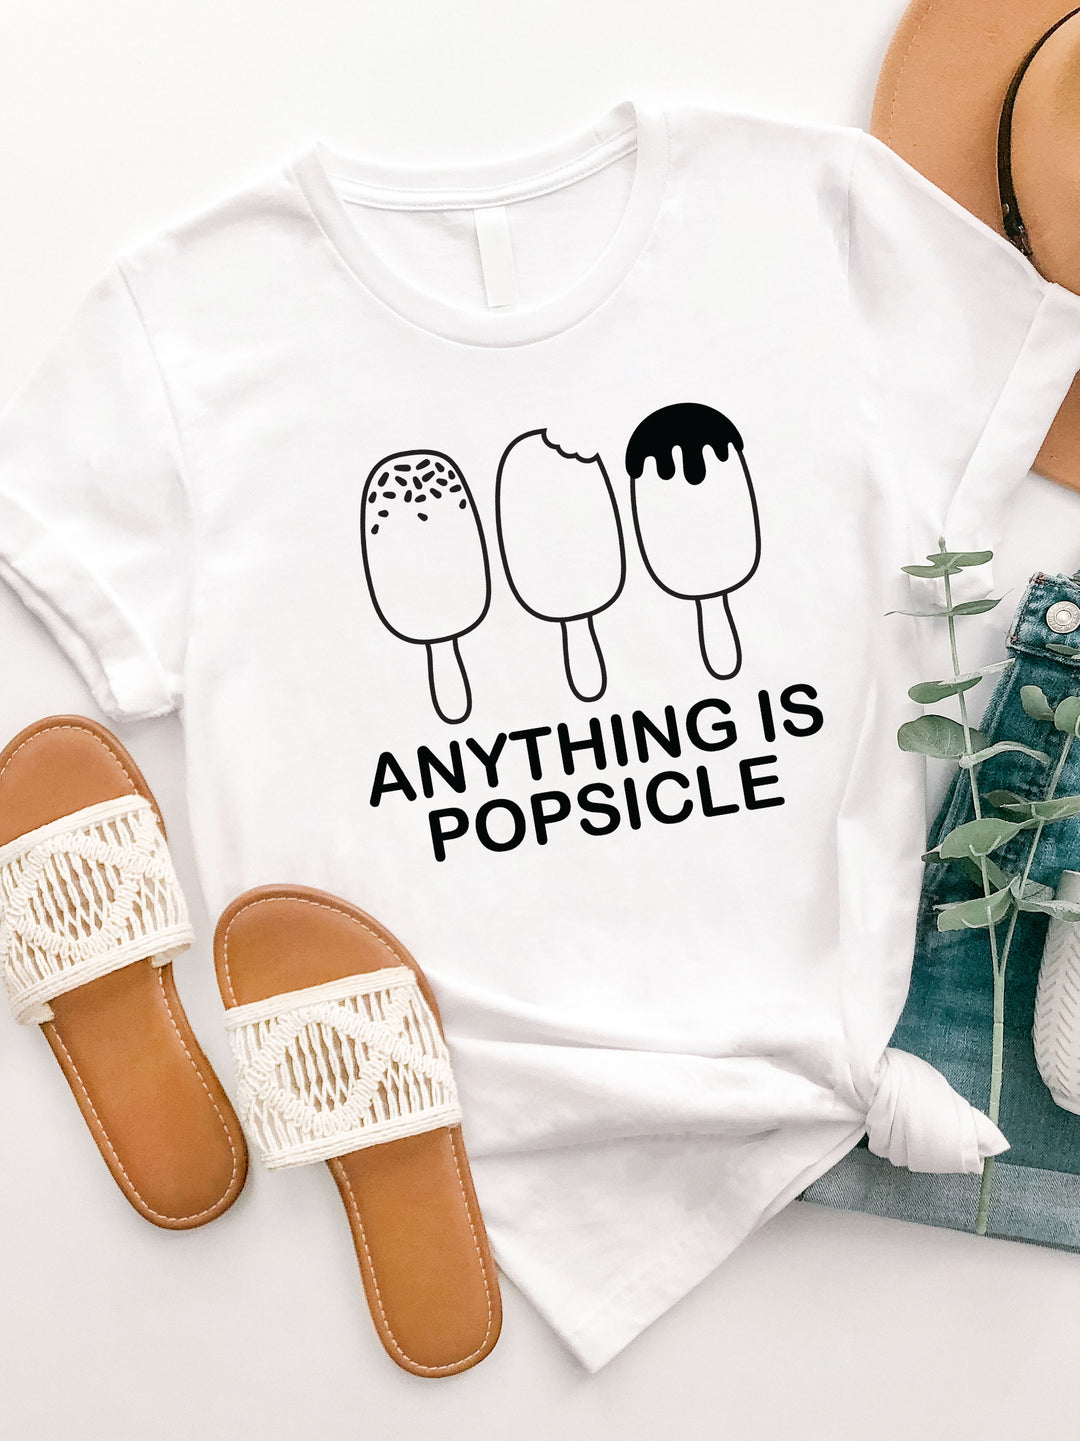 Anything is Popsicle Graphic Tee